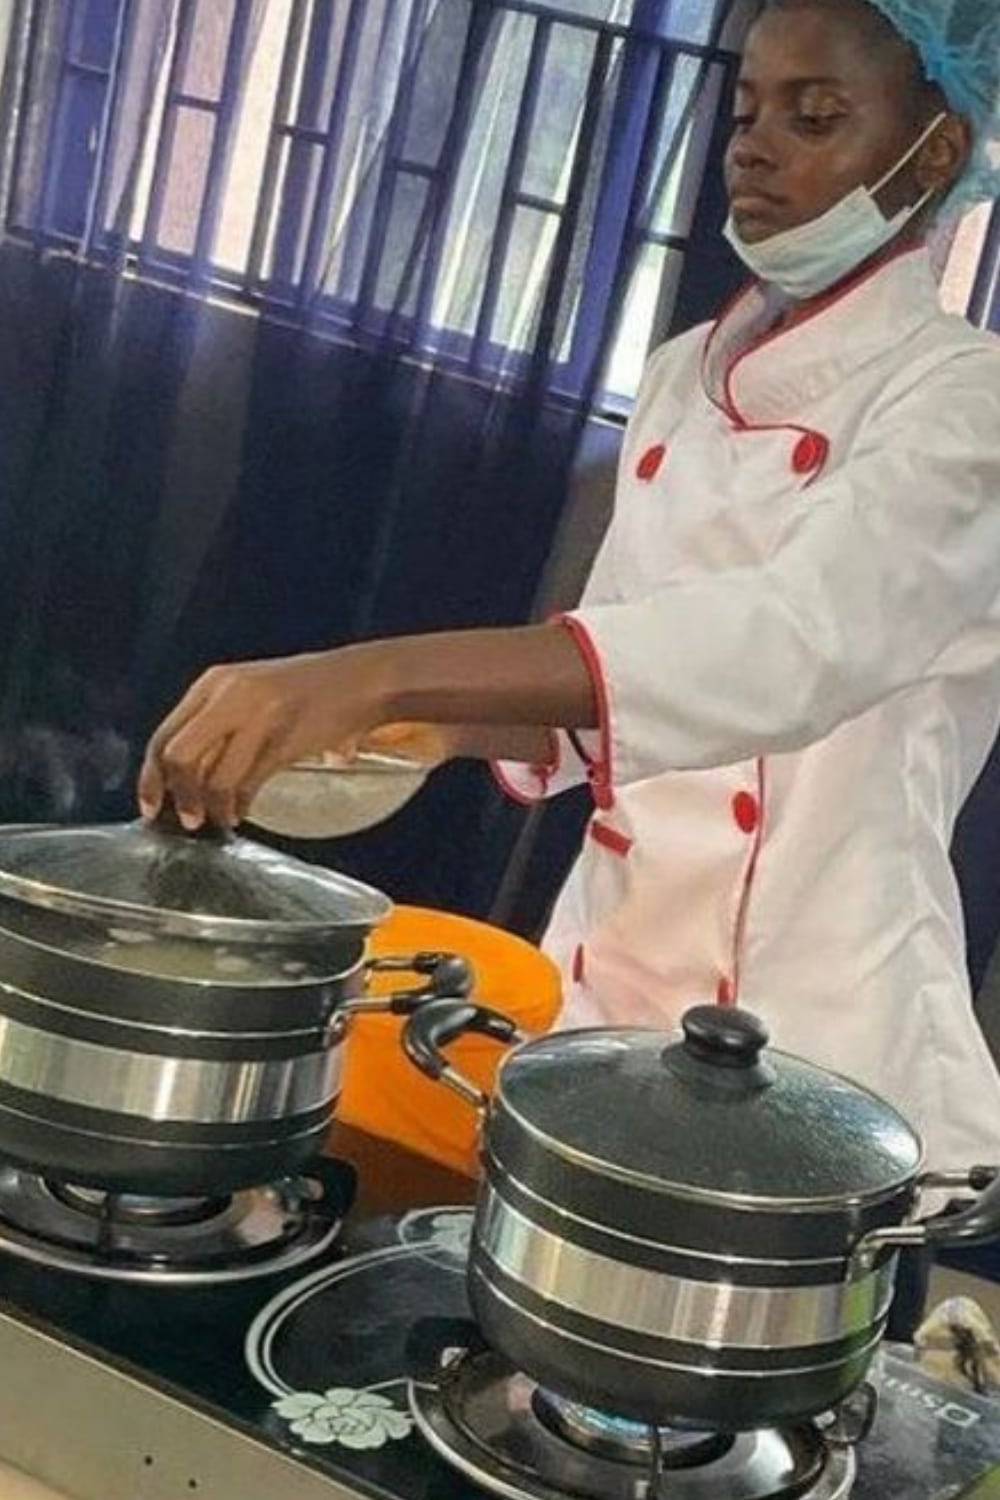 "If you can't support her, then let her be" - Nigerian lady calls out Nigerians for hating chef Dammy (Video)